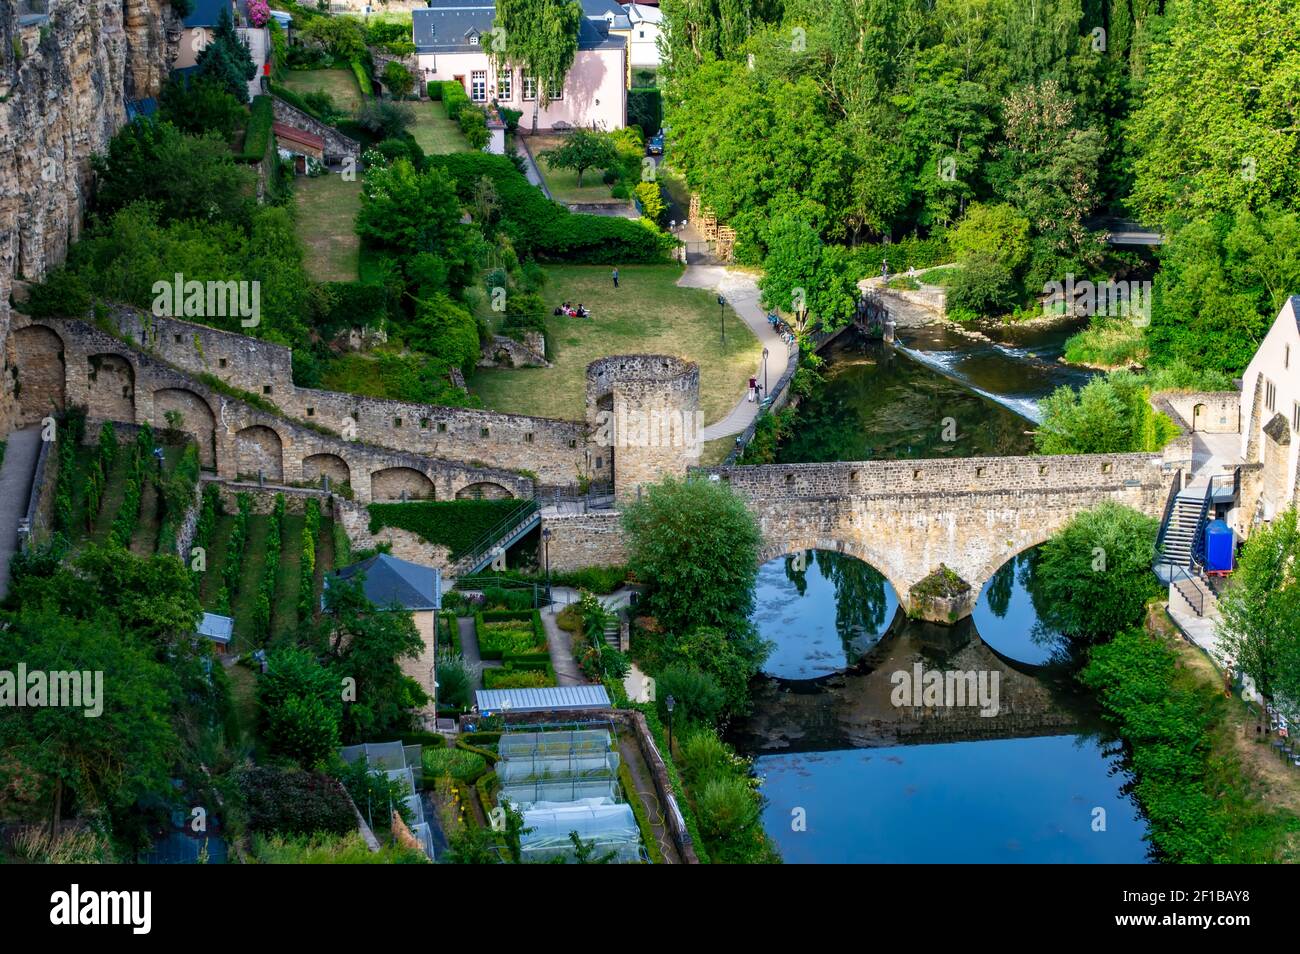 Luxembourg city, Luxembourg - July 16, 2019: Old fortification walls in Old Town of Luxembourg city in Europe Stock Photo